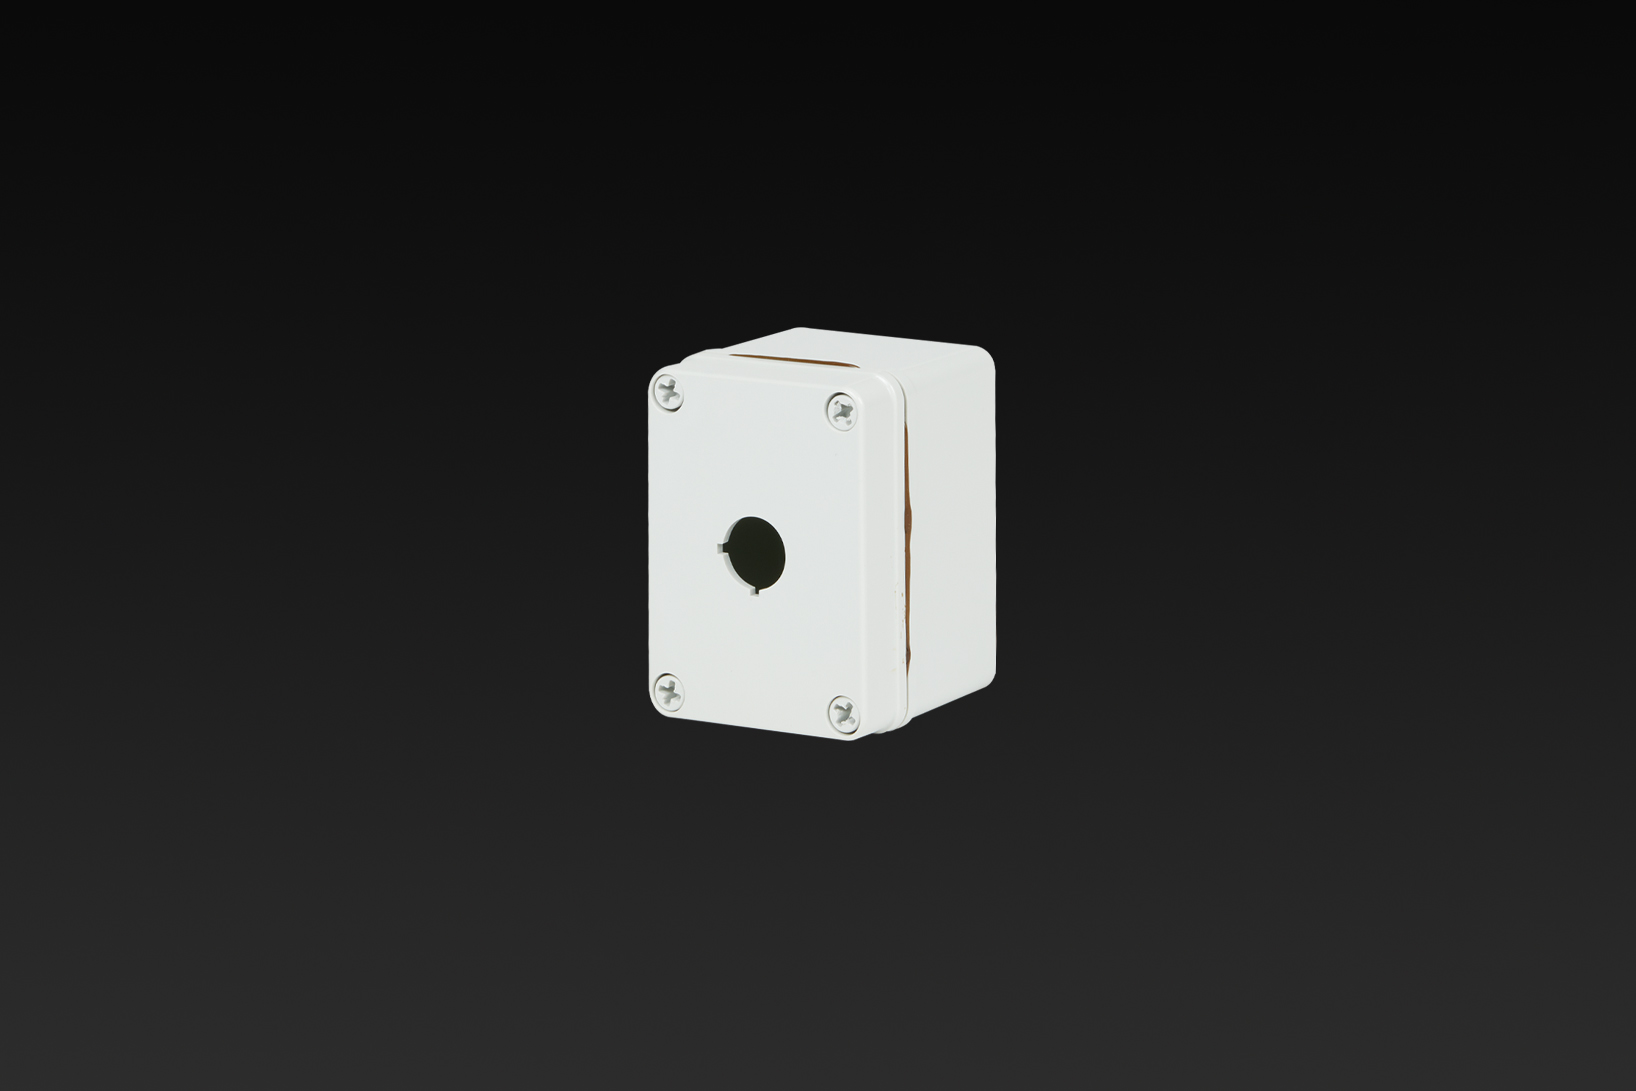 22mm polycarbonate push button enclosure by AttaBox®